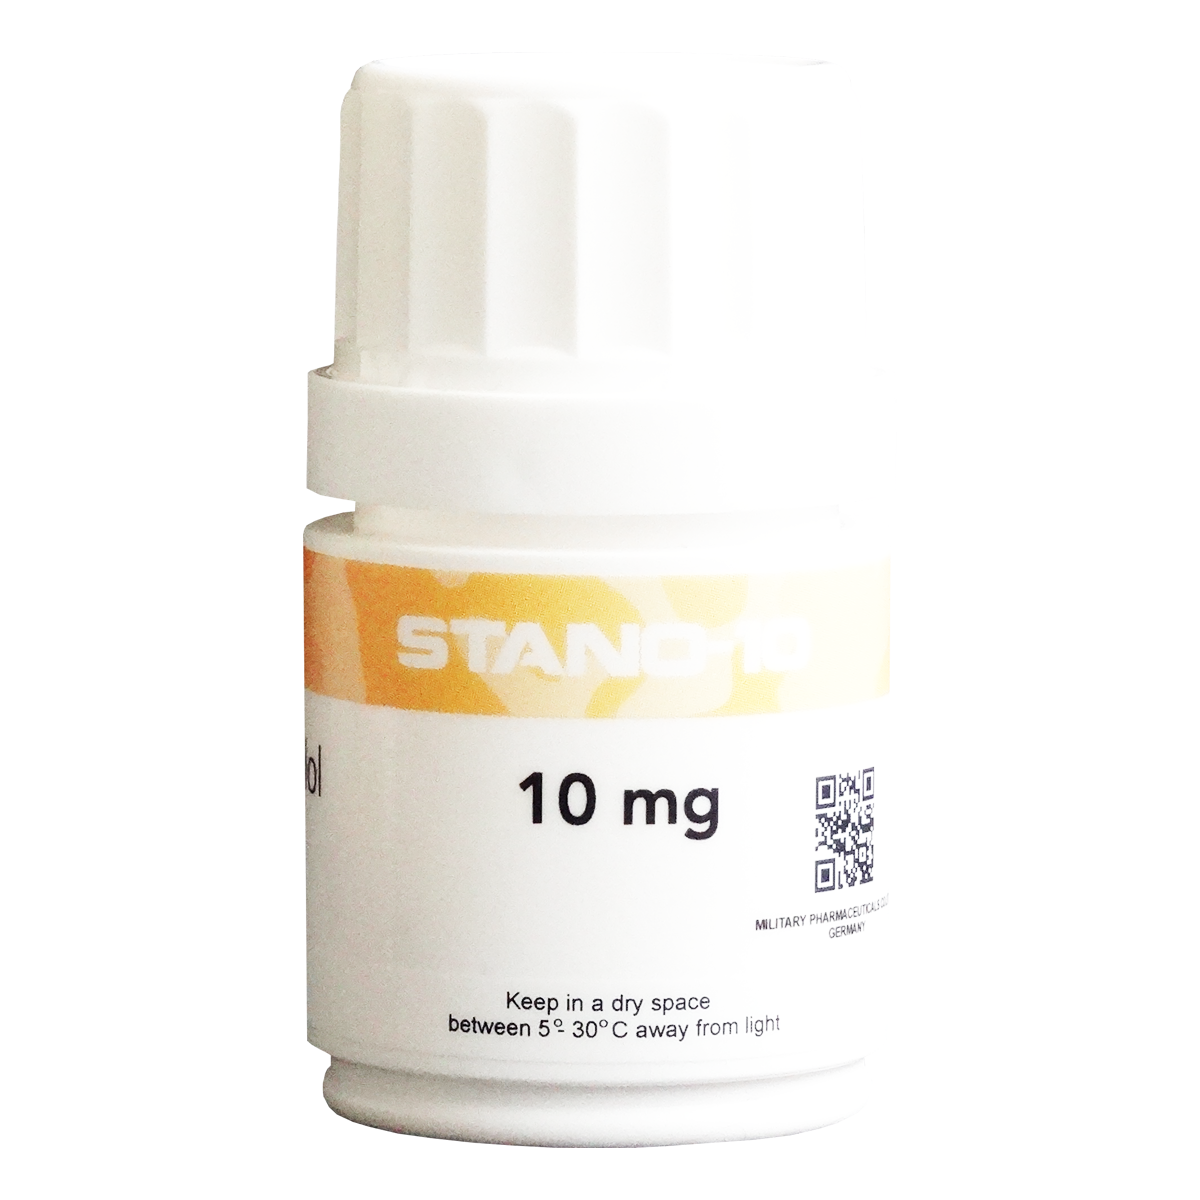 Military-Pharma_Stromba_oral_Steroids_Stanozolol_tablets_Burn_Fats_Weight_Loss_Lean_Muscle_Gain_Strength_Speed_Endurance